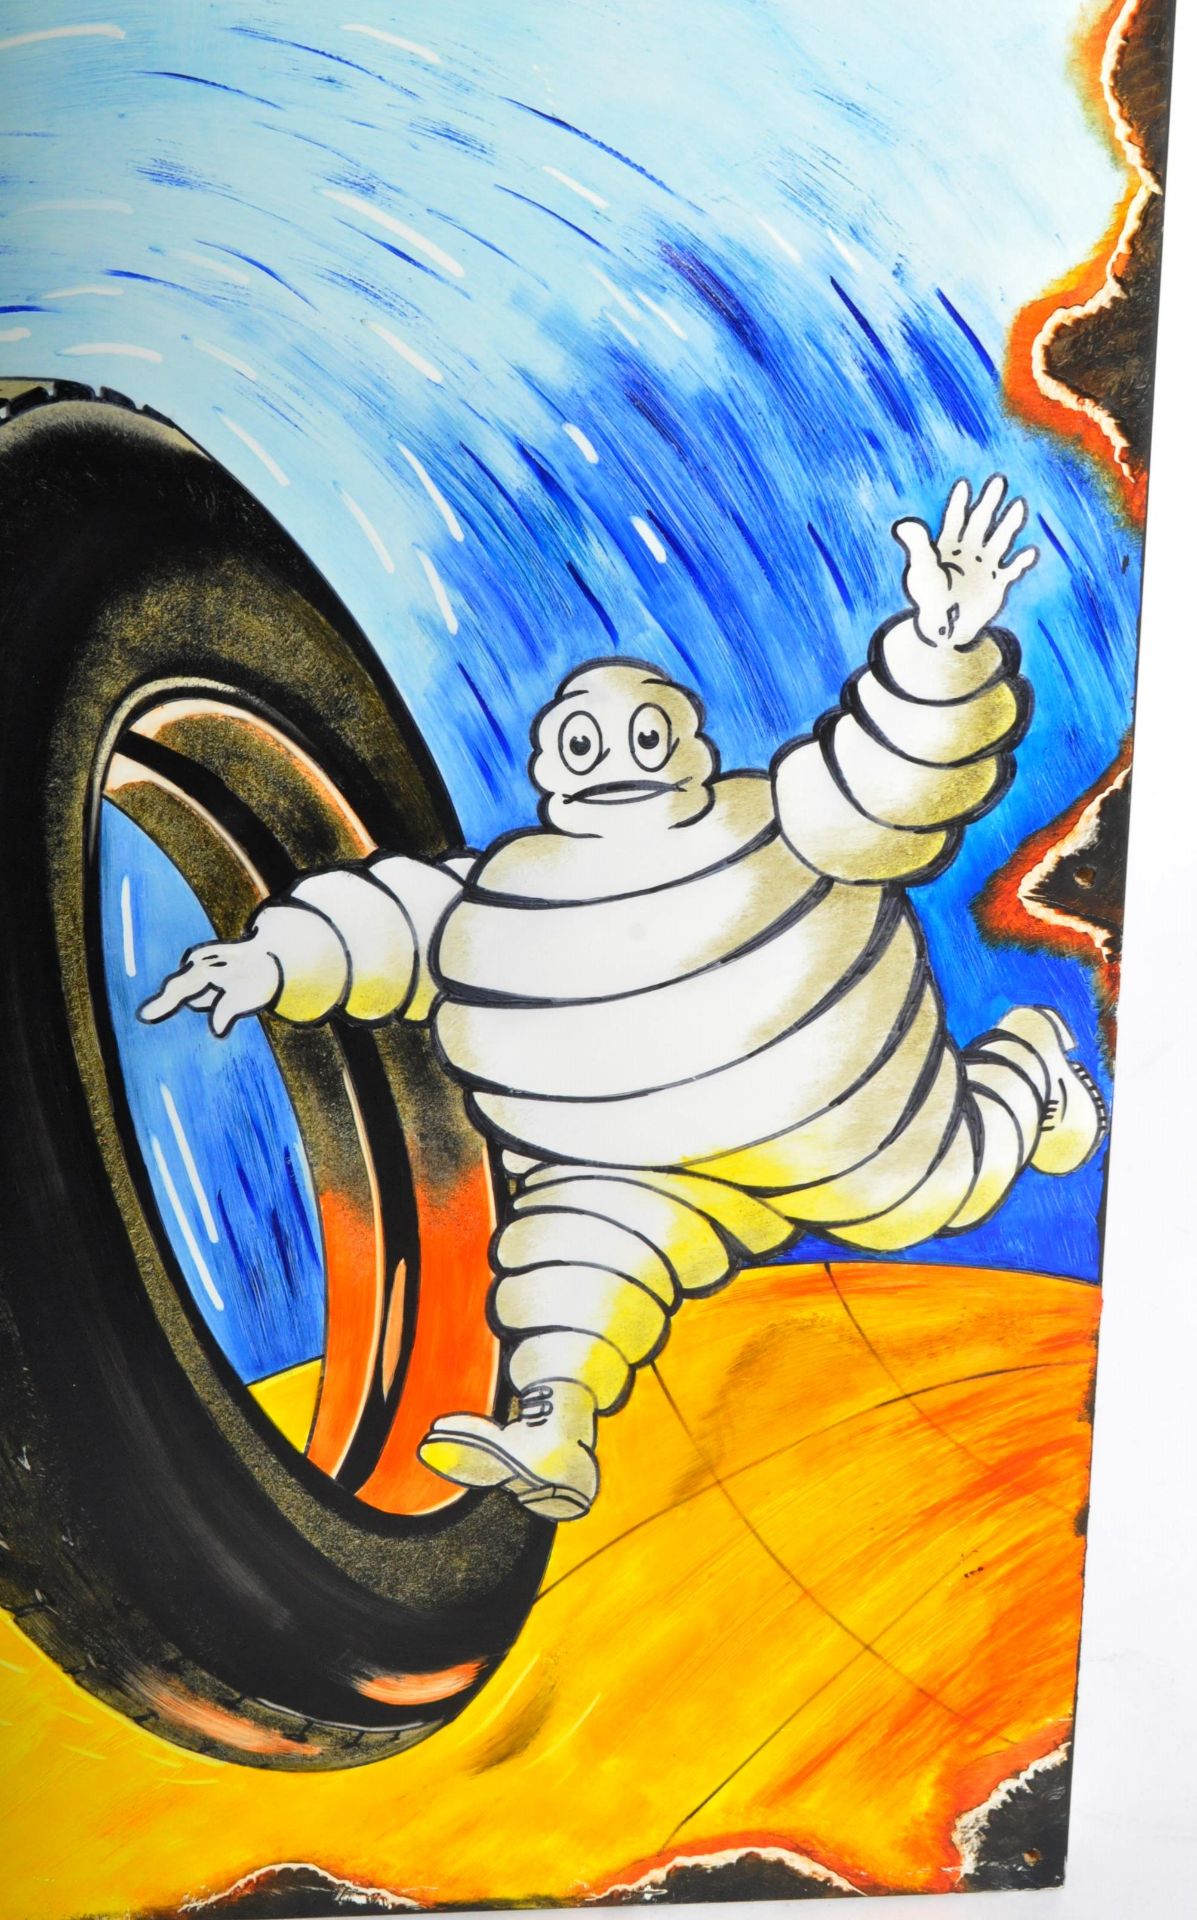 MICHELIN - ARTIST'S IMPRESSION OF A TRADITIONAL ENAMEL SIGN - Image 3 of 4